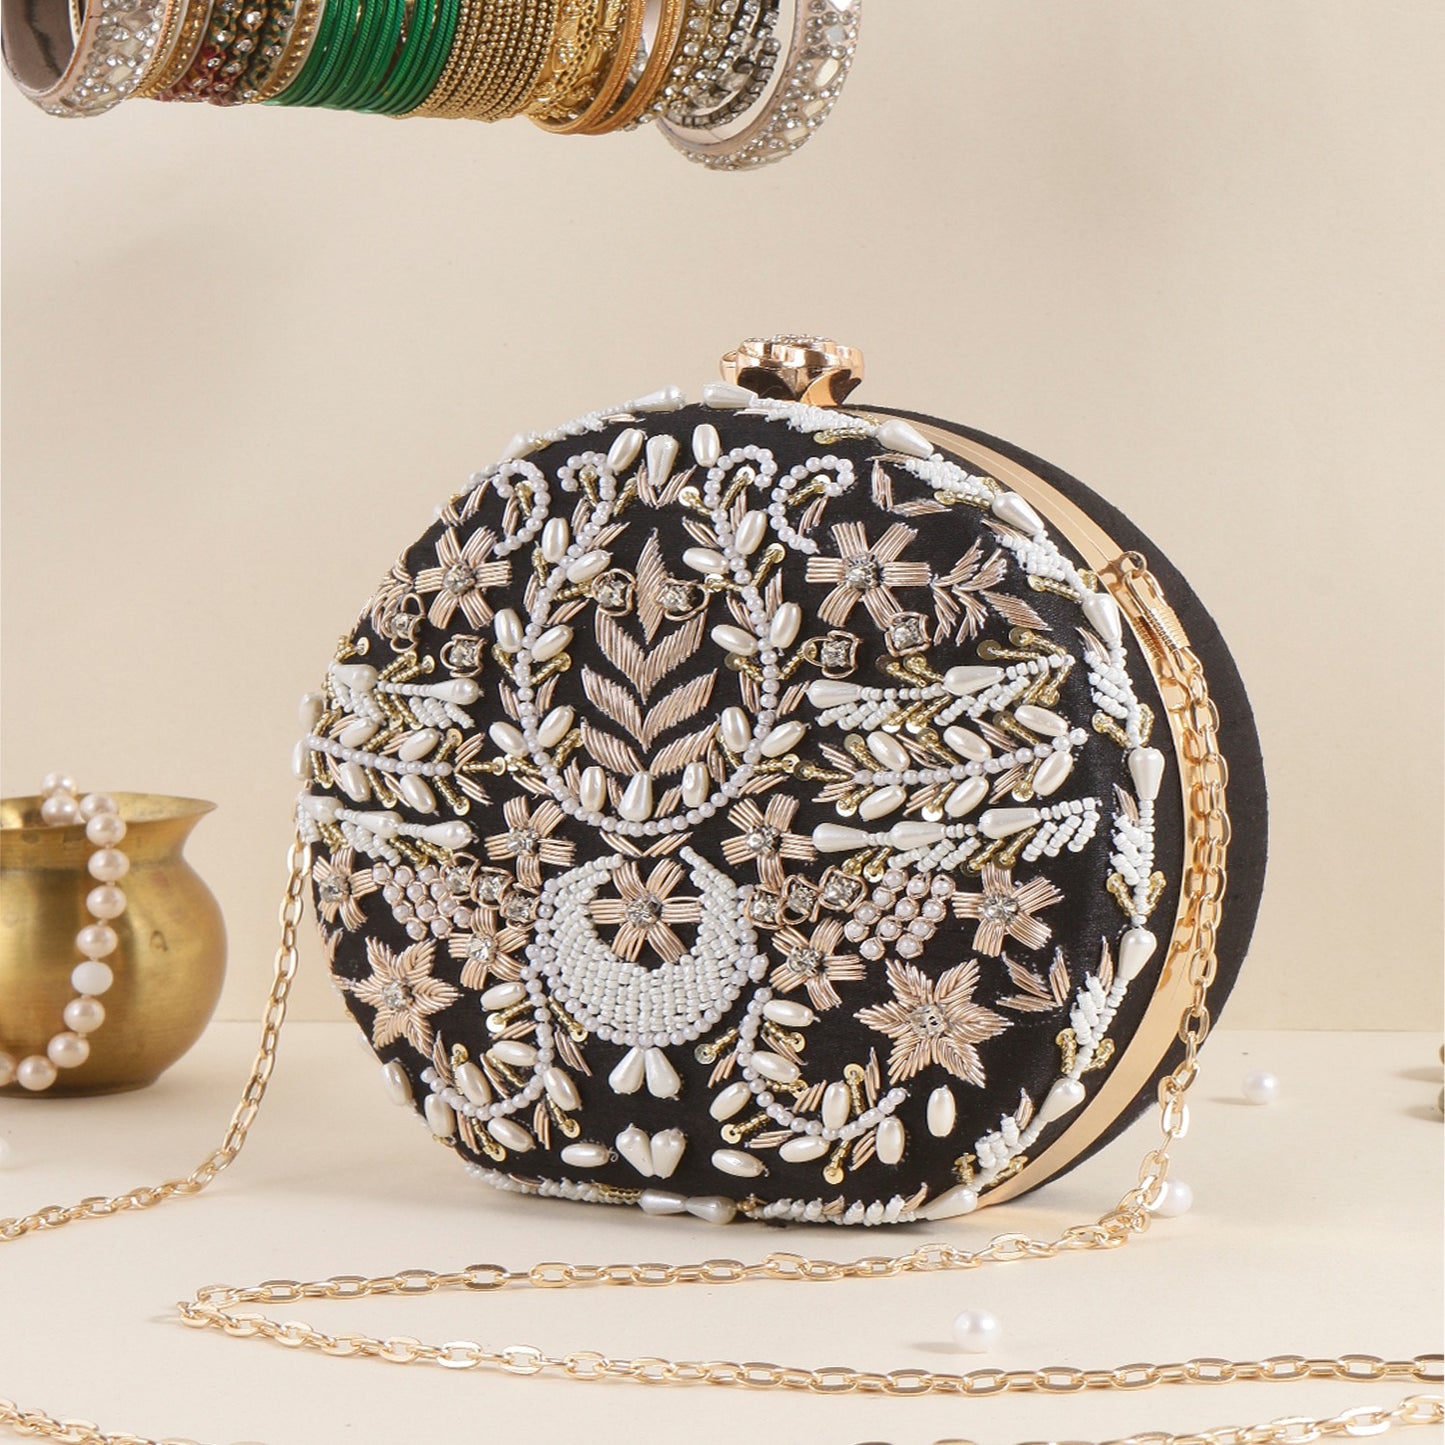 Susan embroidered clutch bag